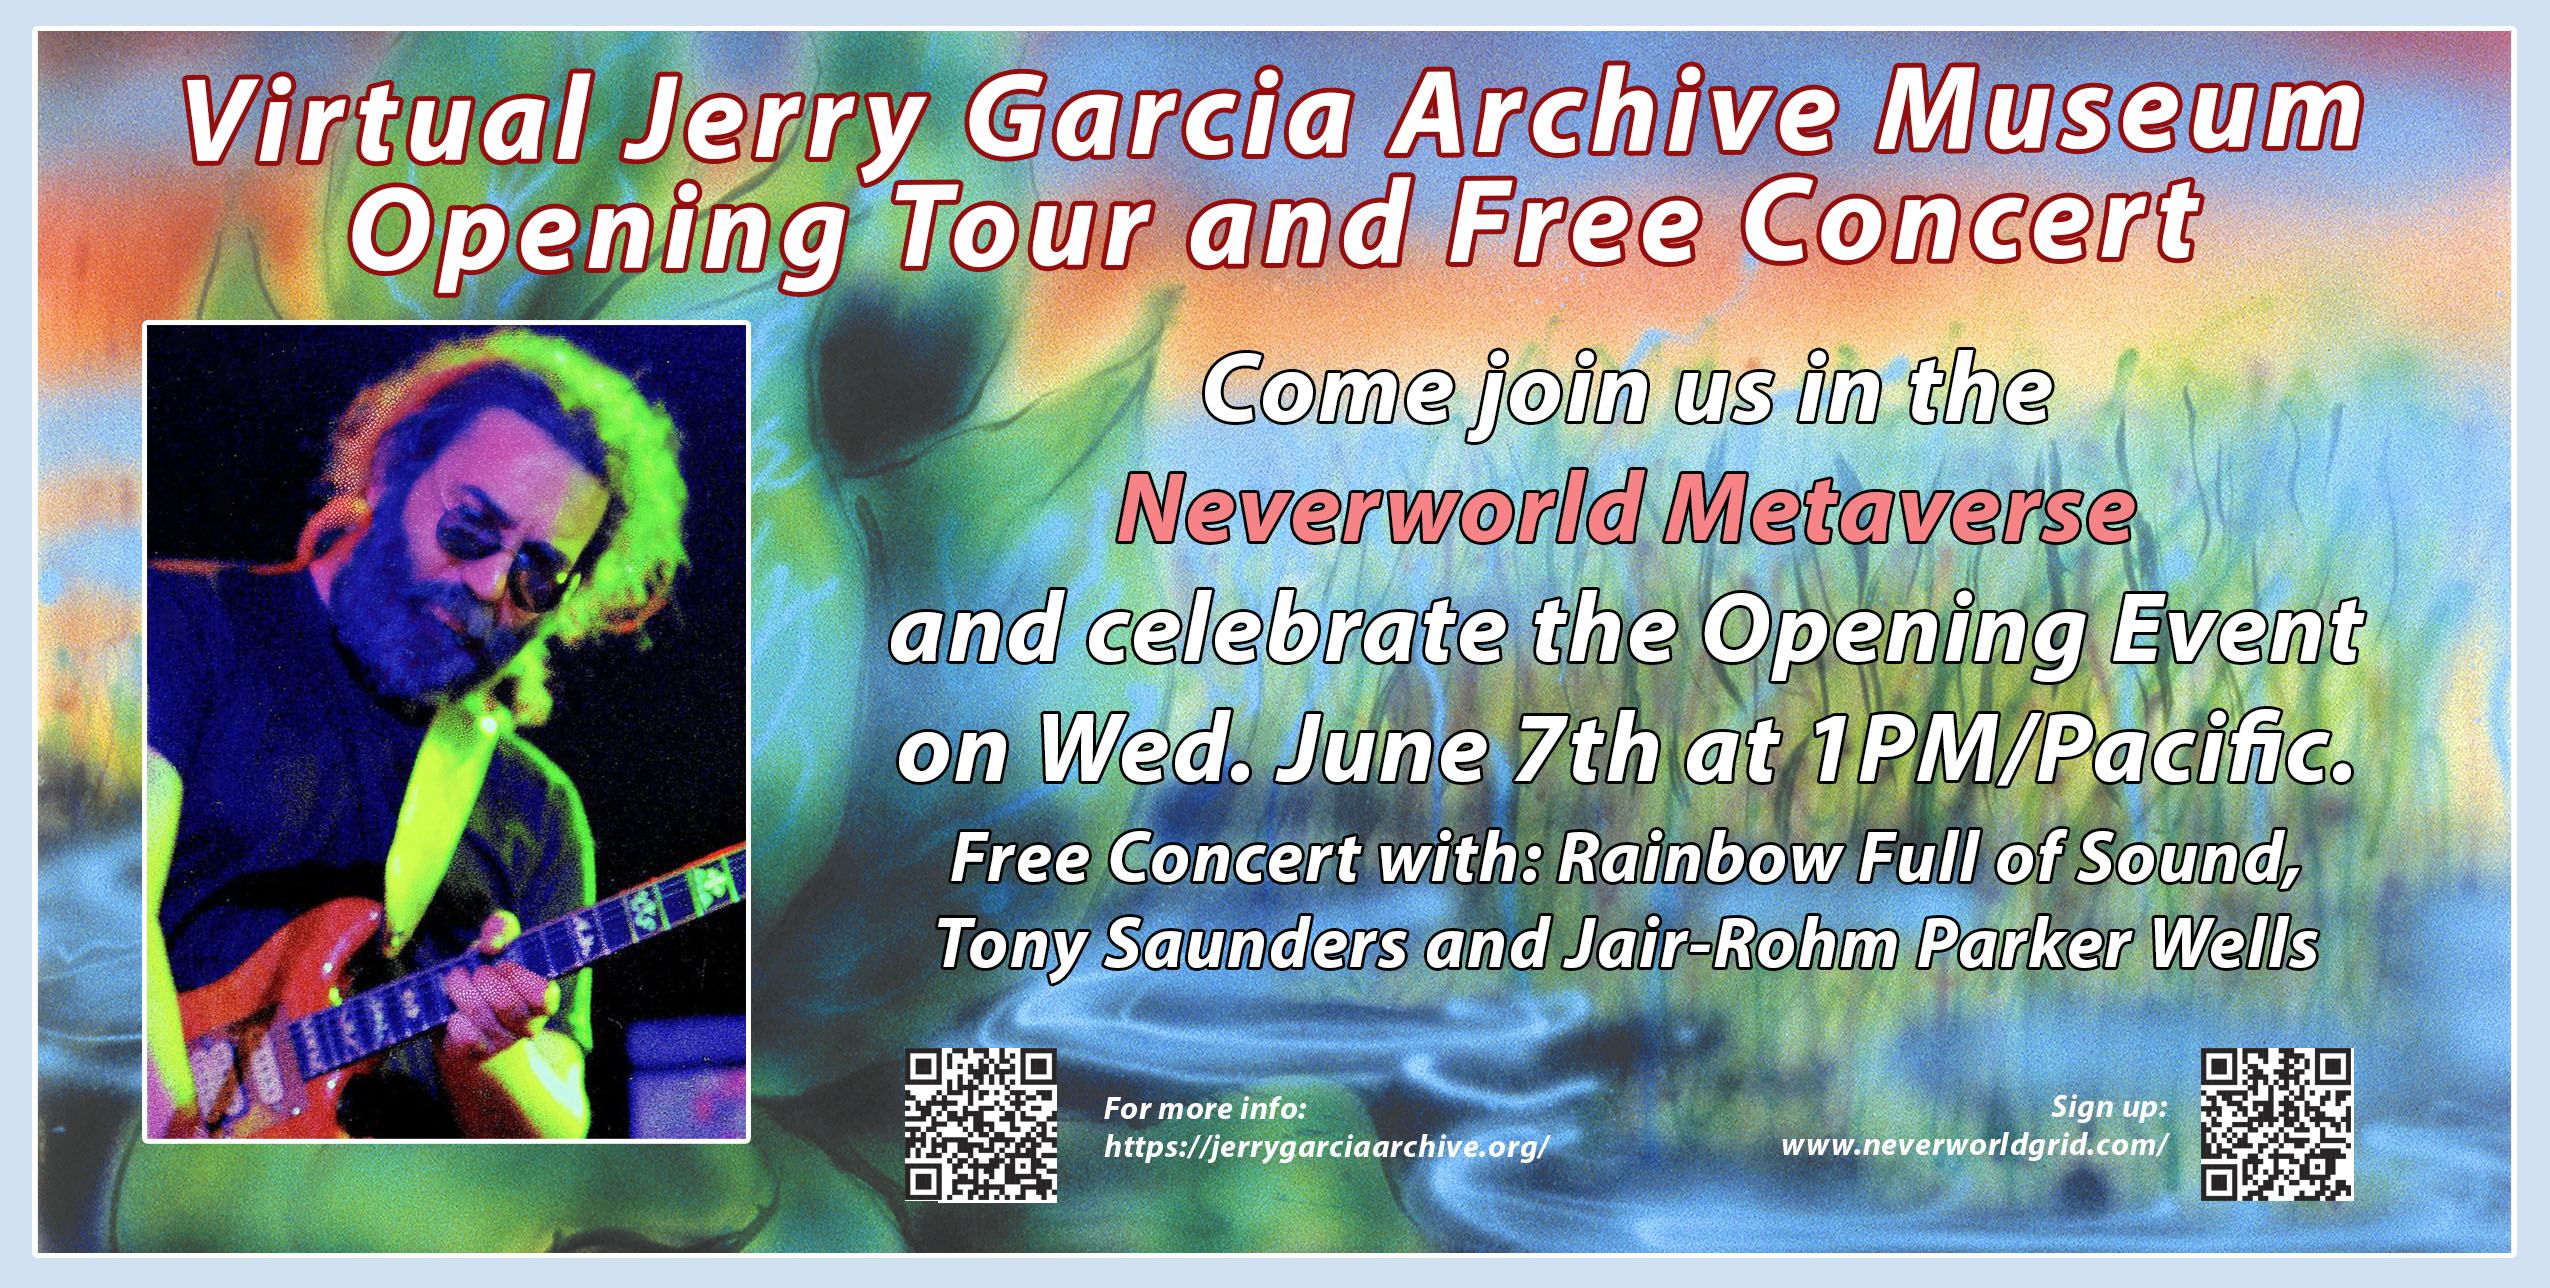 Virtual Jerry Garcia Archive Museum Opens With Free Concert and Tour